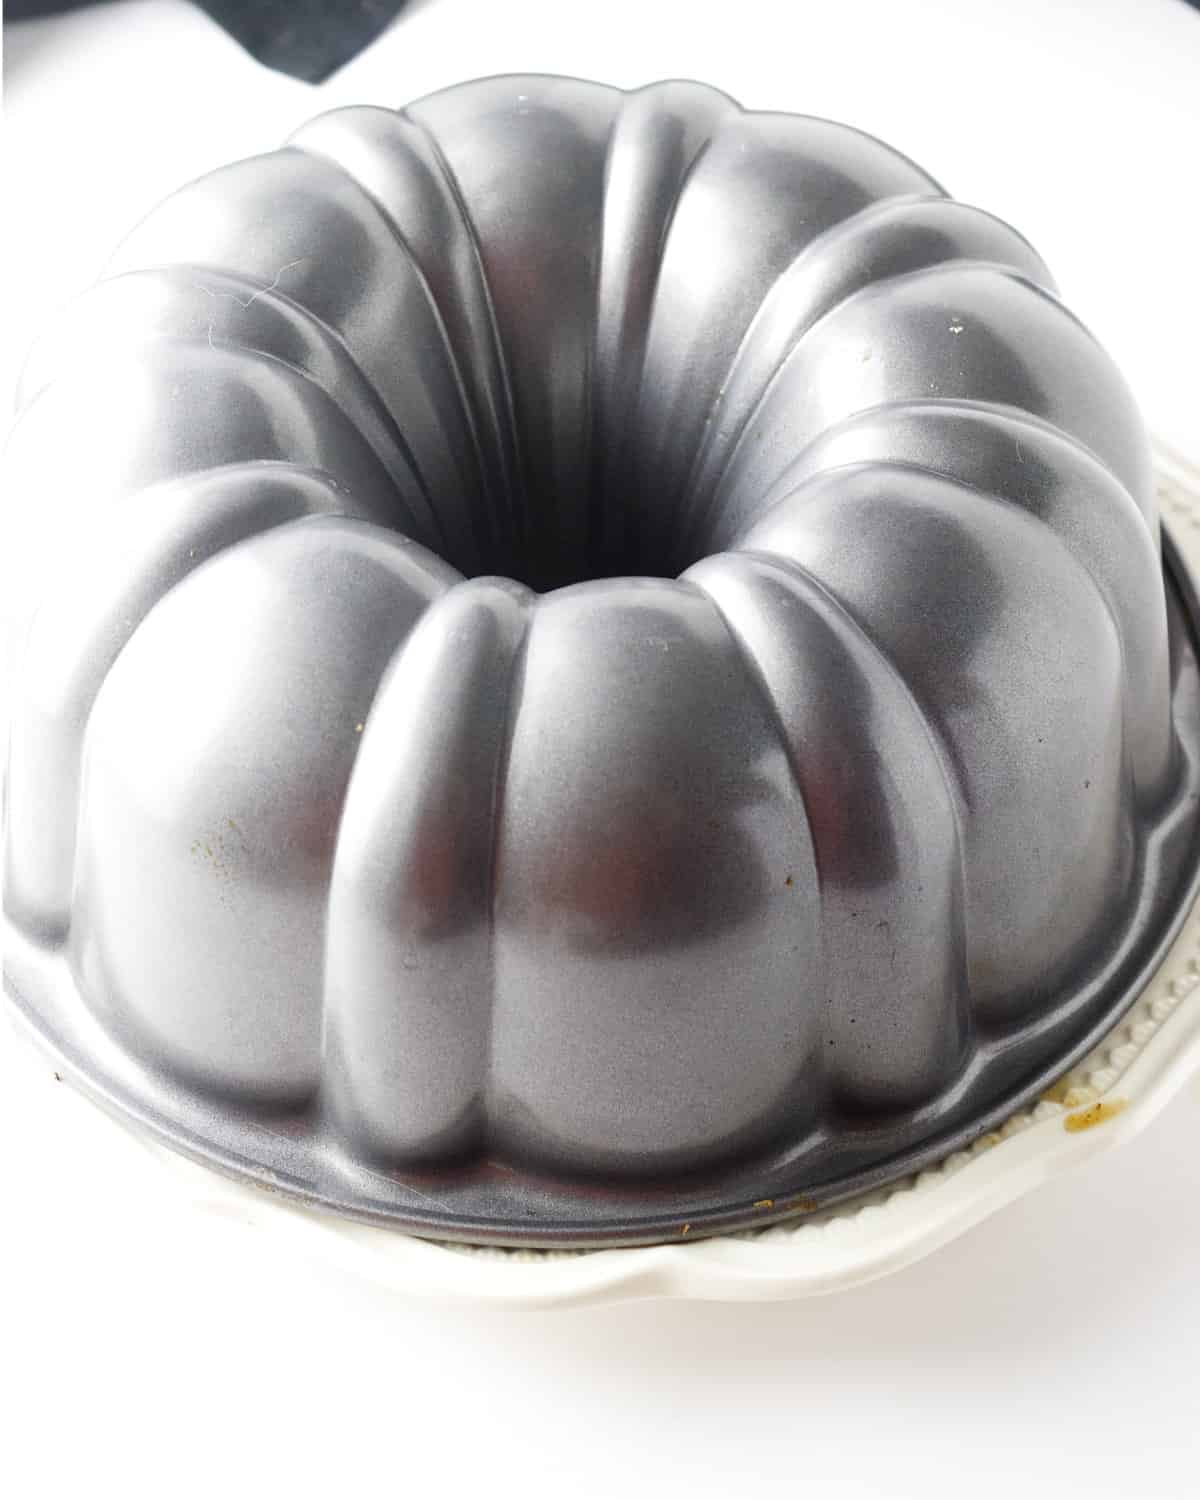 upside down bundt pan turning out baked goods.